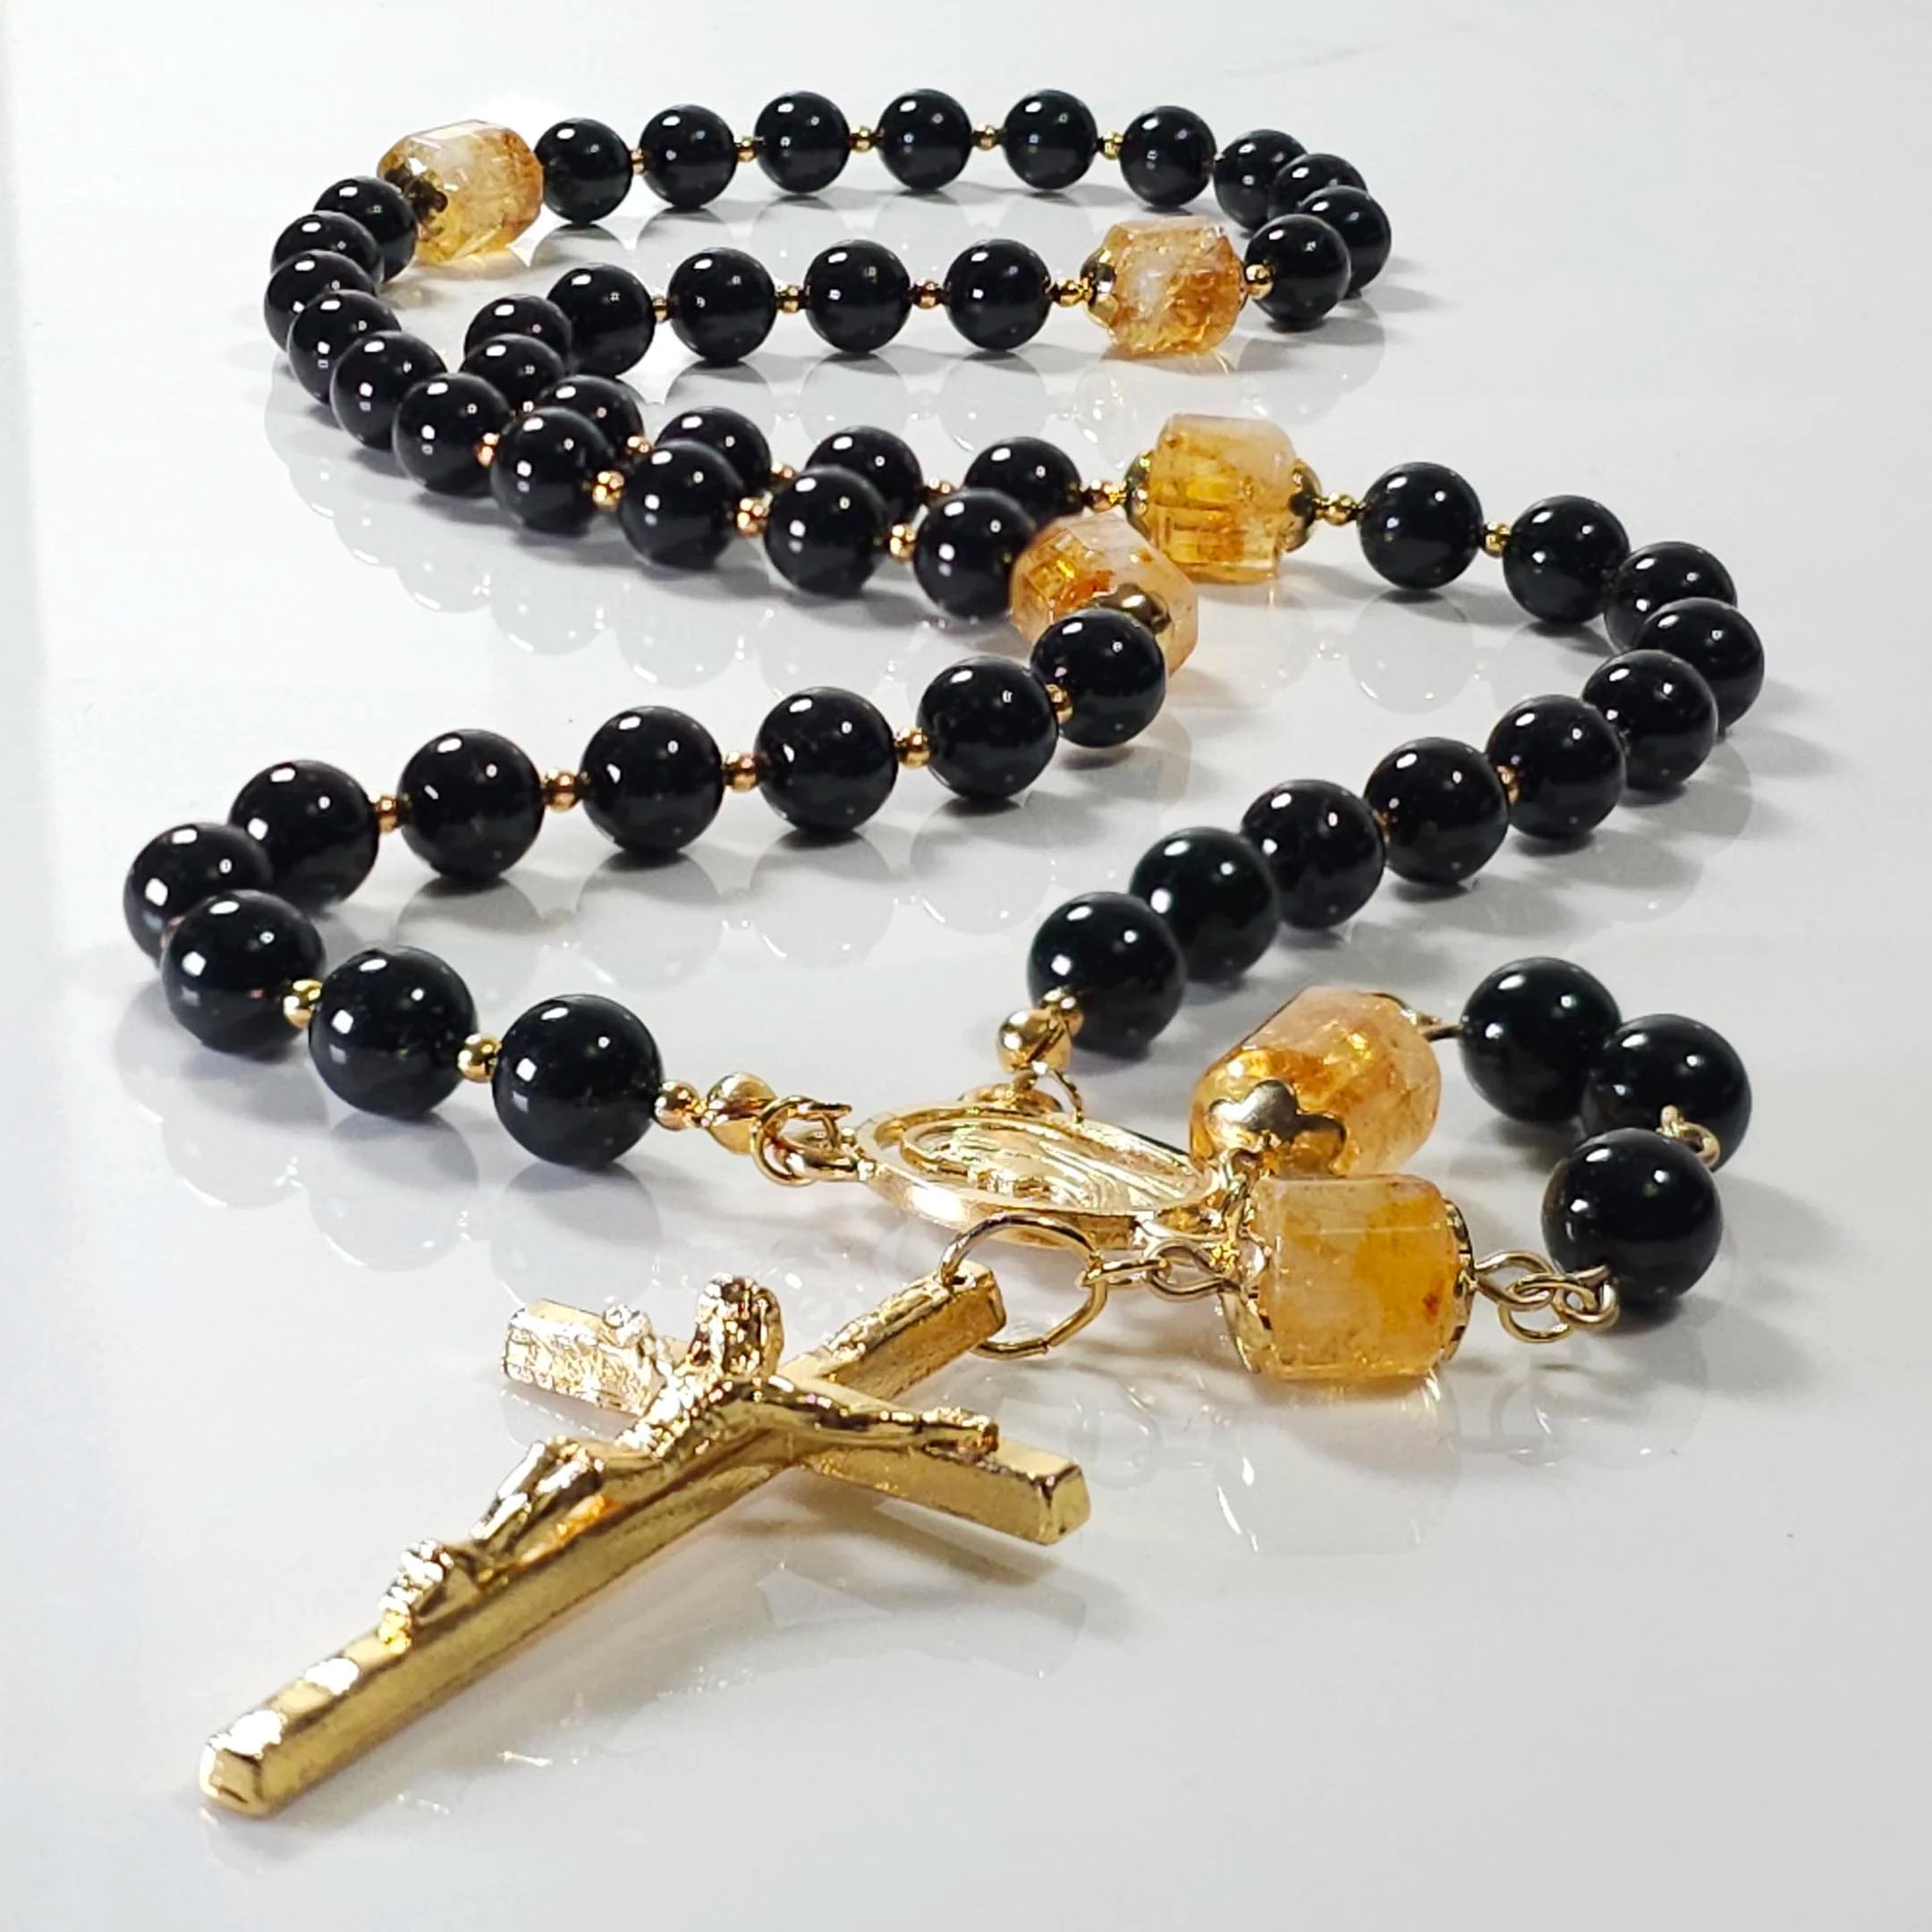 Our lady of Loreto rosary, laying on the table.